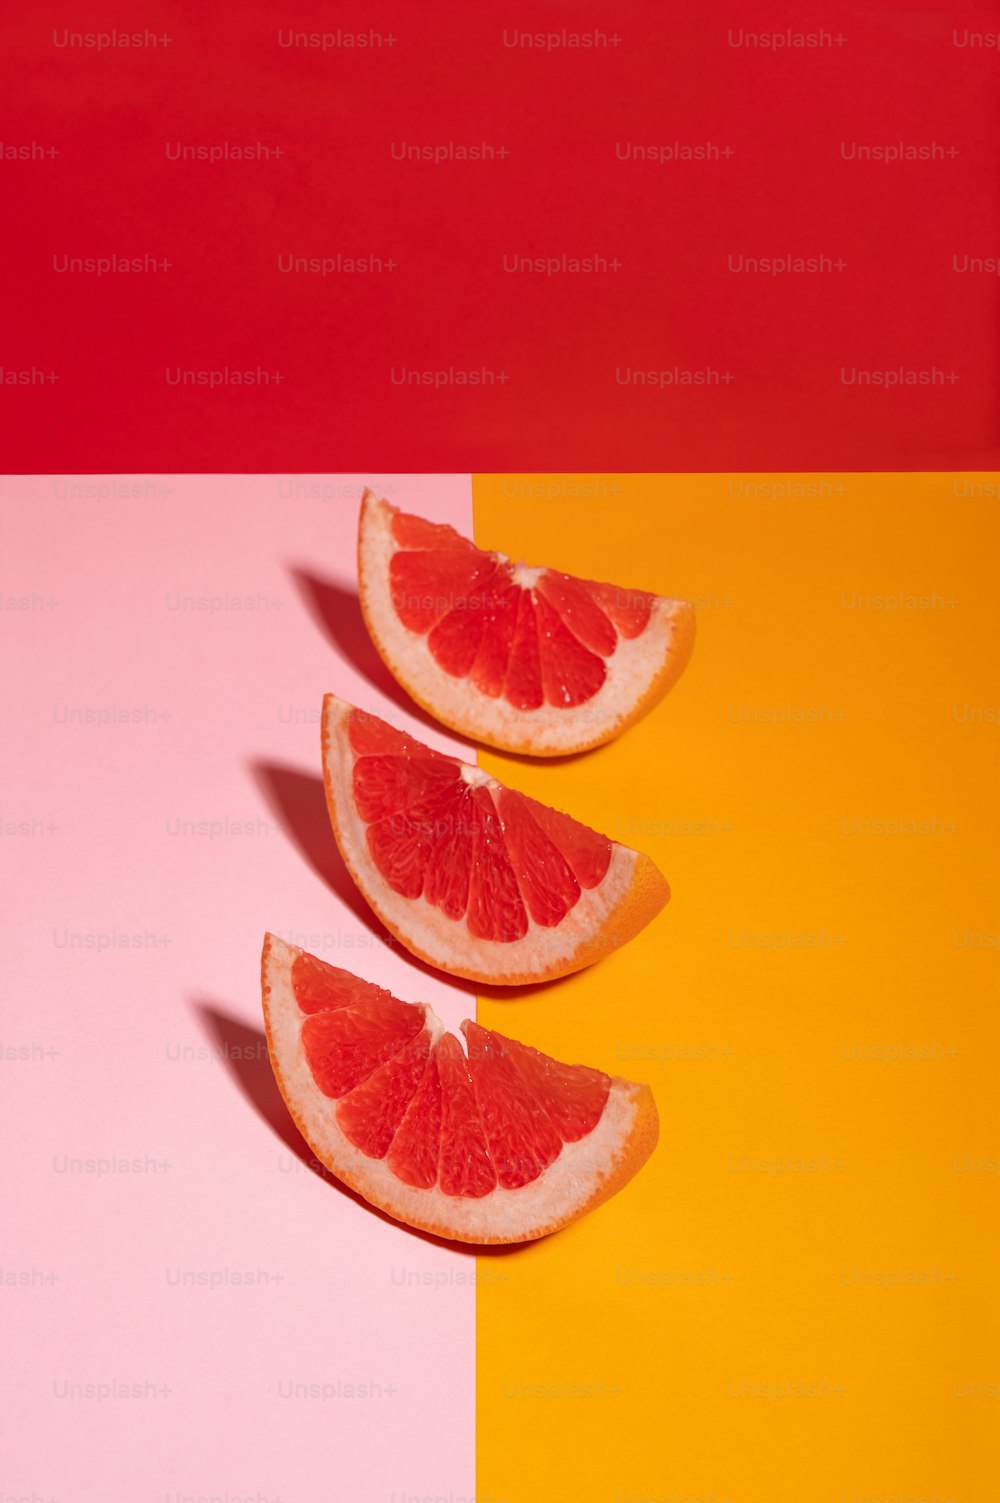 three grapefruits cut in half on a multi - colored background